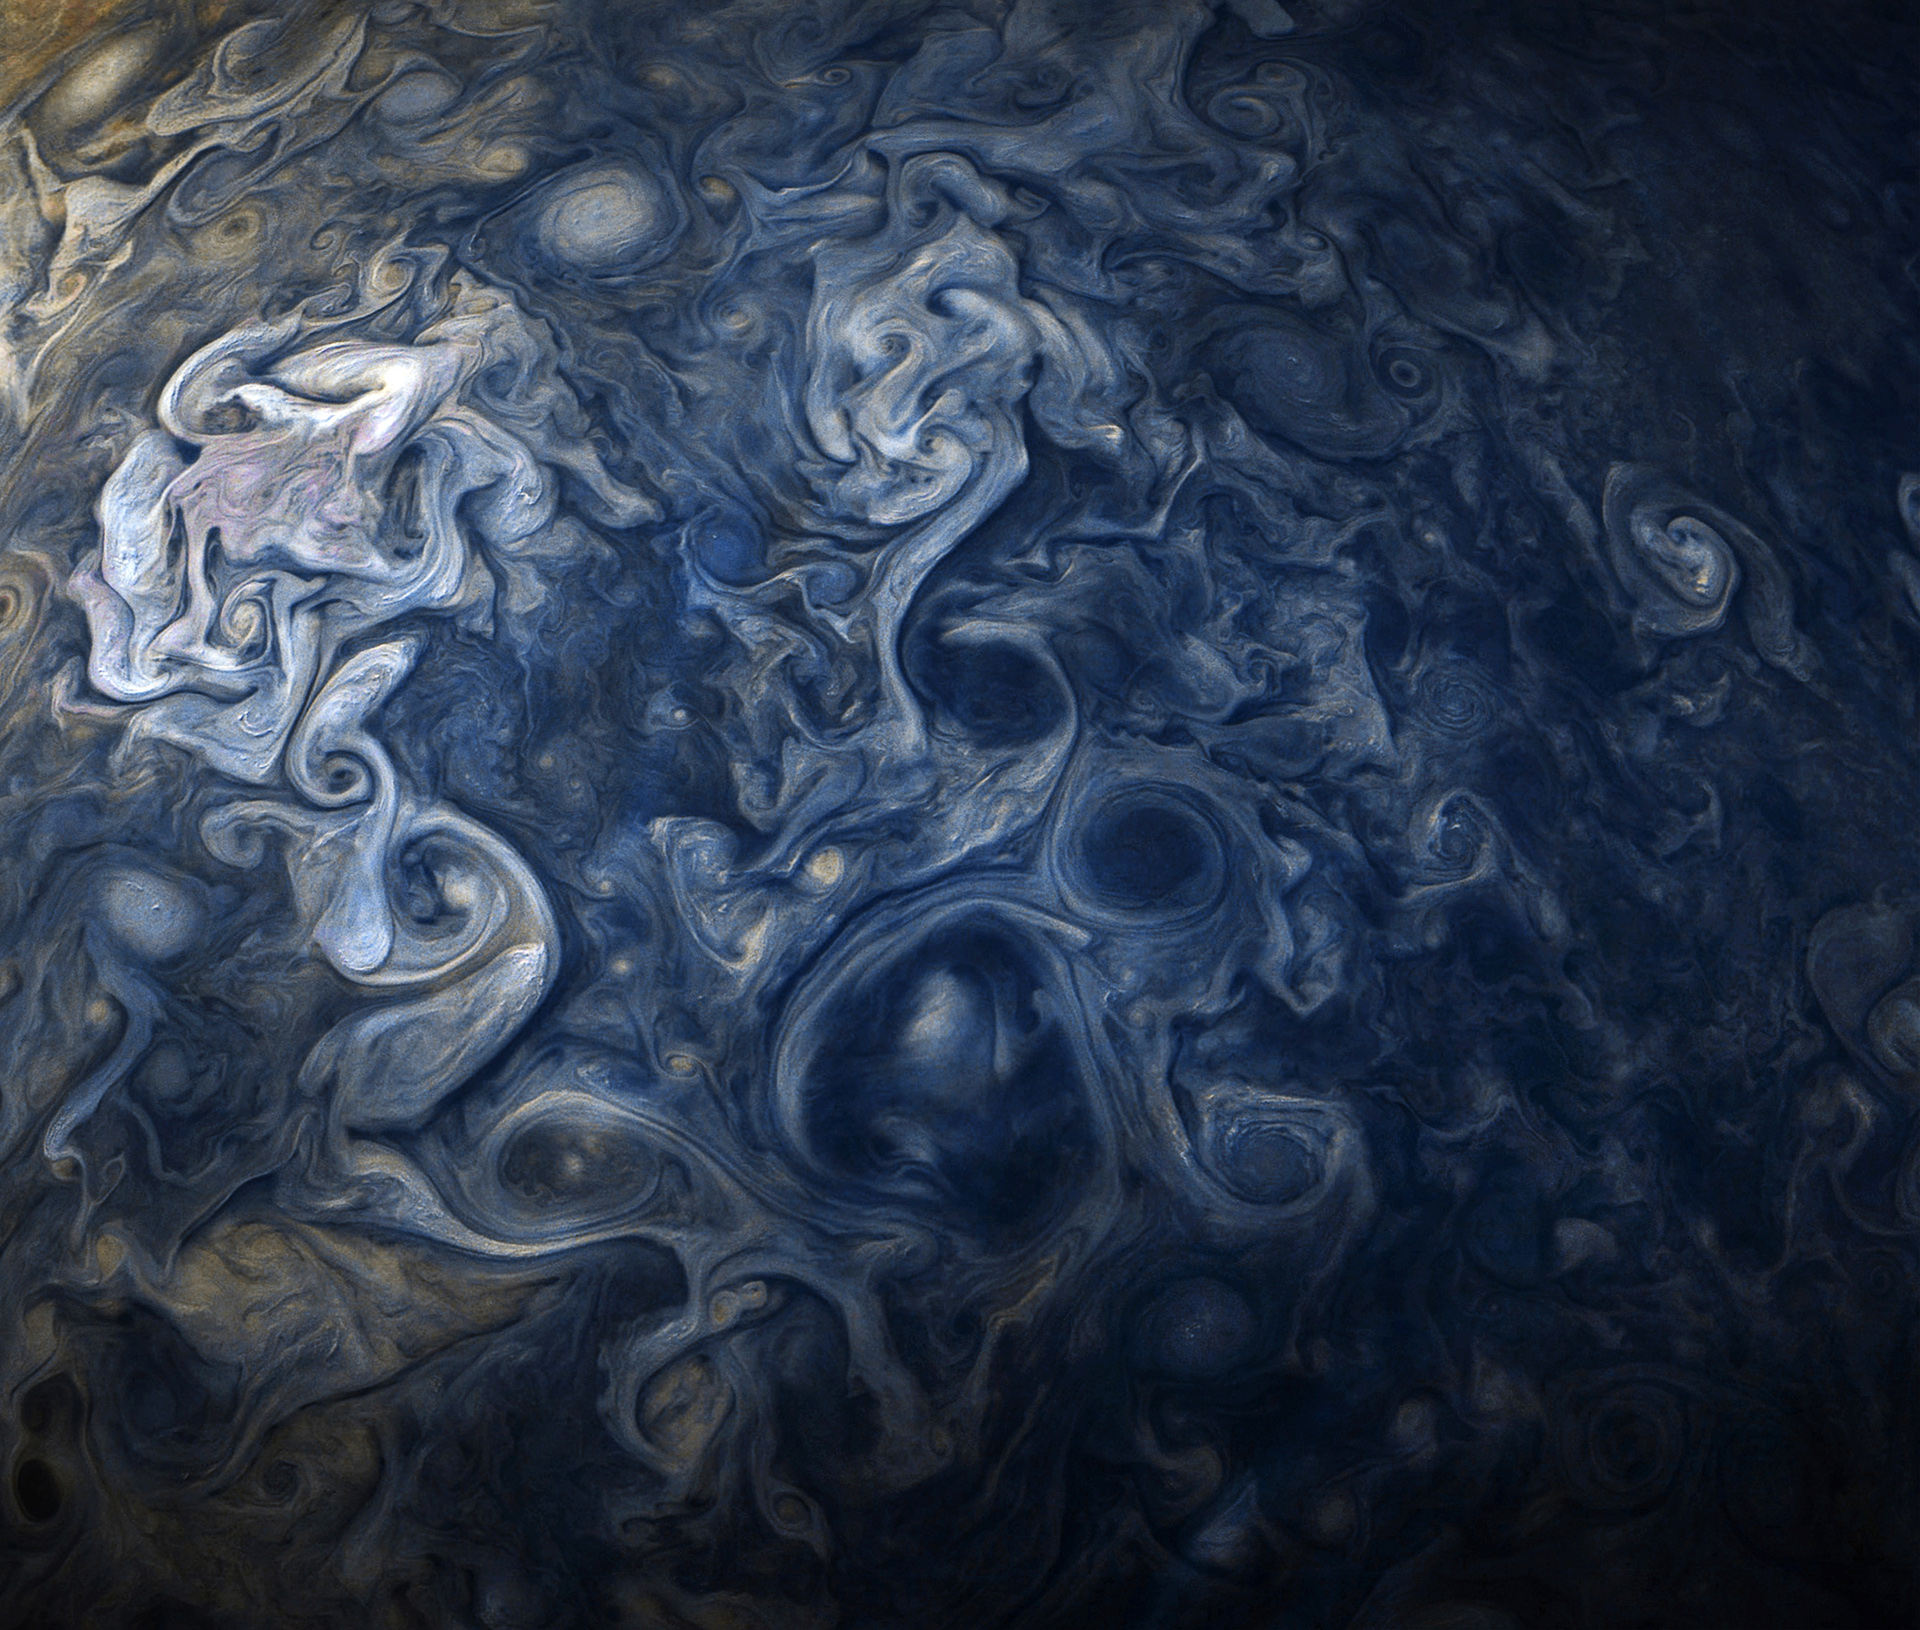 Circular currents, or vortices, in Jupiter's atmosphere taken by the Juno spacecraft. (Photo NASA)